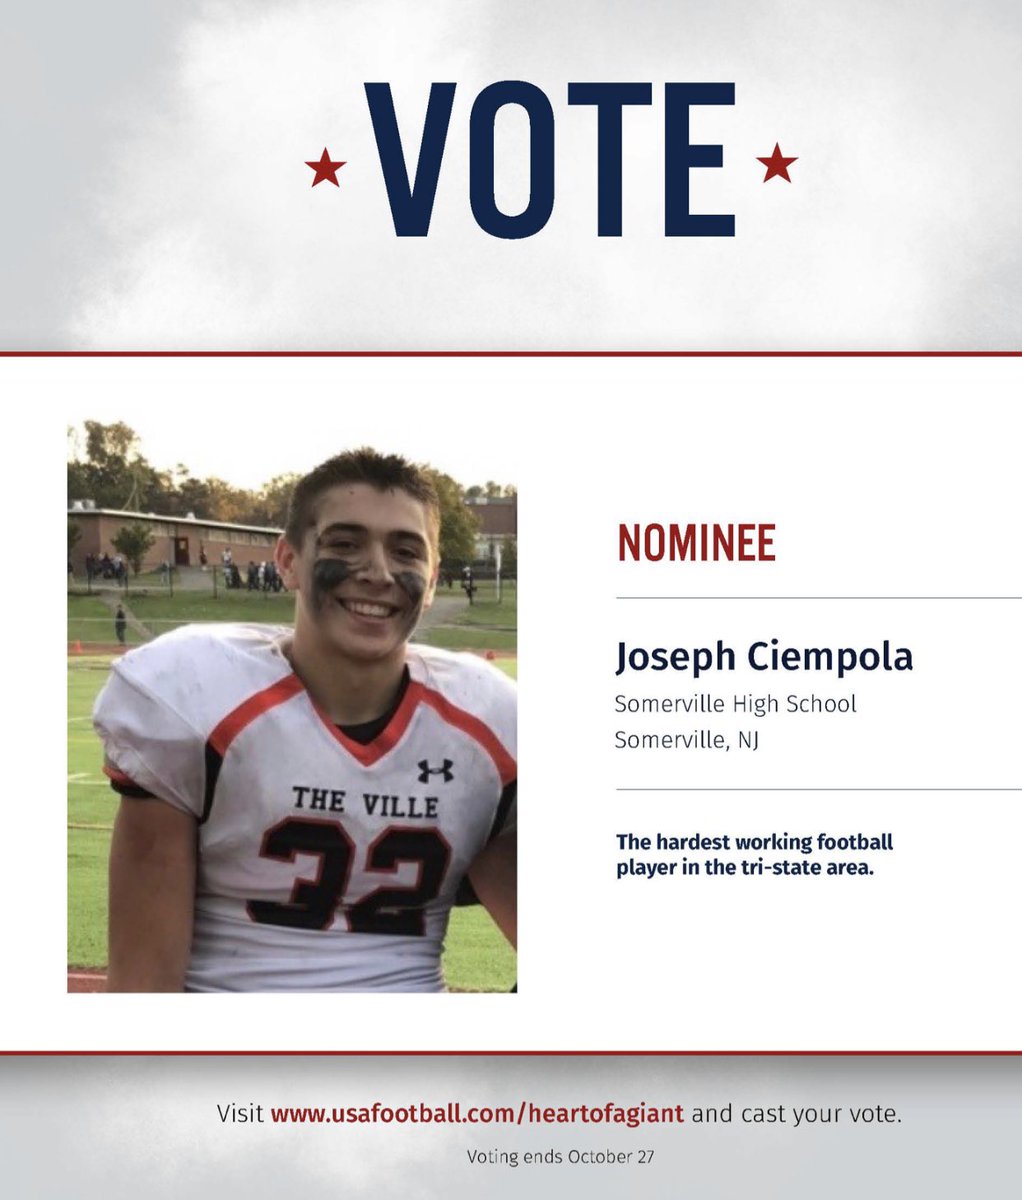 Joe Ciempola has been nominated for Heart of a Giant Award for his work on the football field & with @SHSLifeSkills & @SHSUBBC17. Joe is an outstanding young man, please take a moment to vote for him on the link below! www2.usafootball.com/poll_managemen…